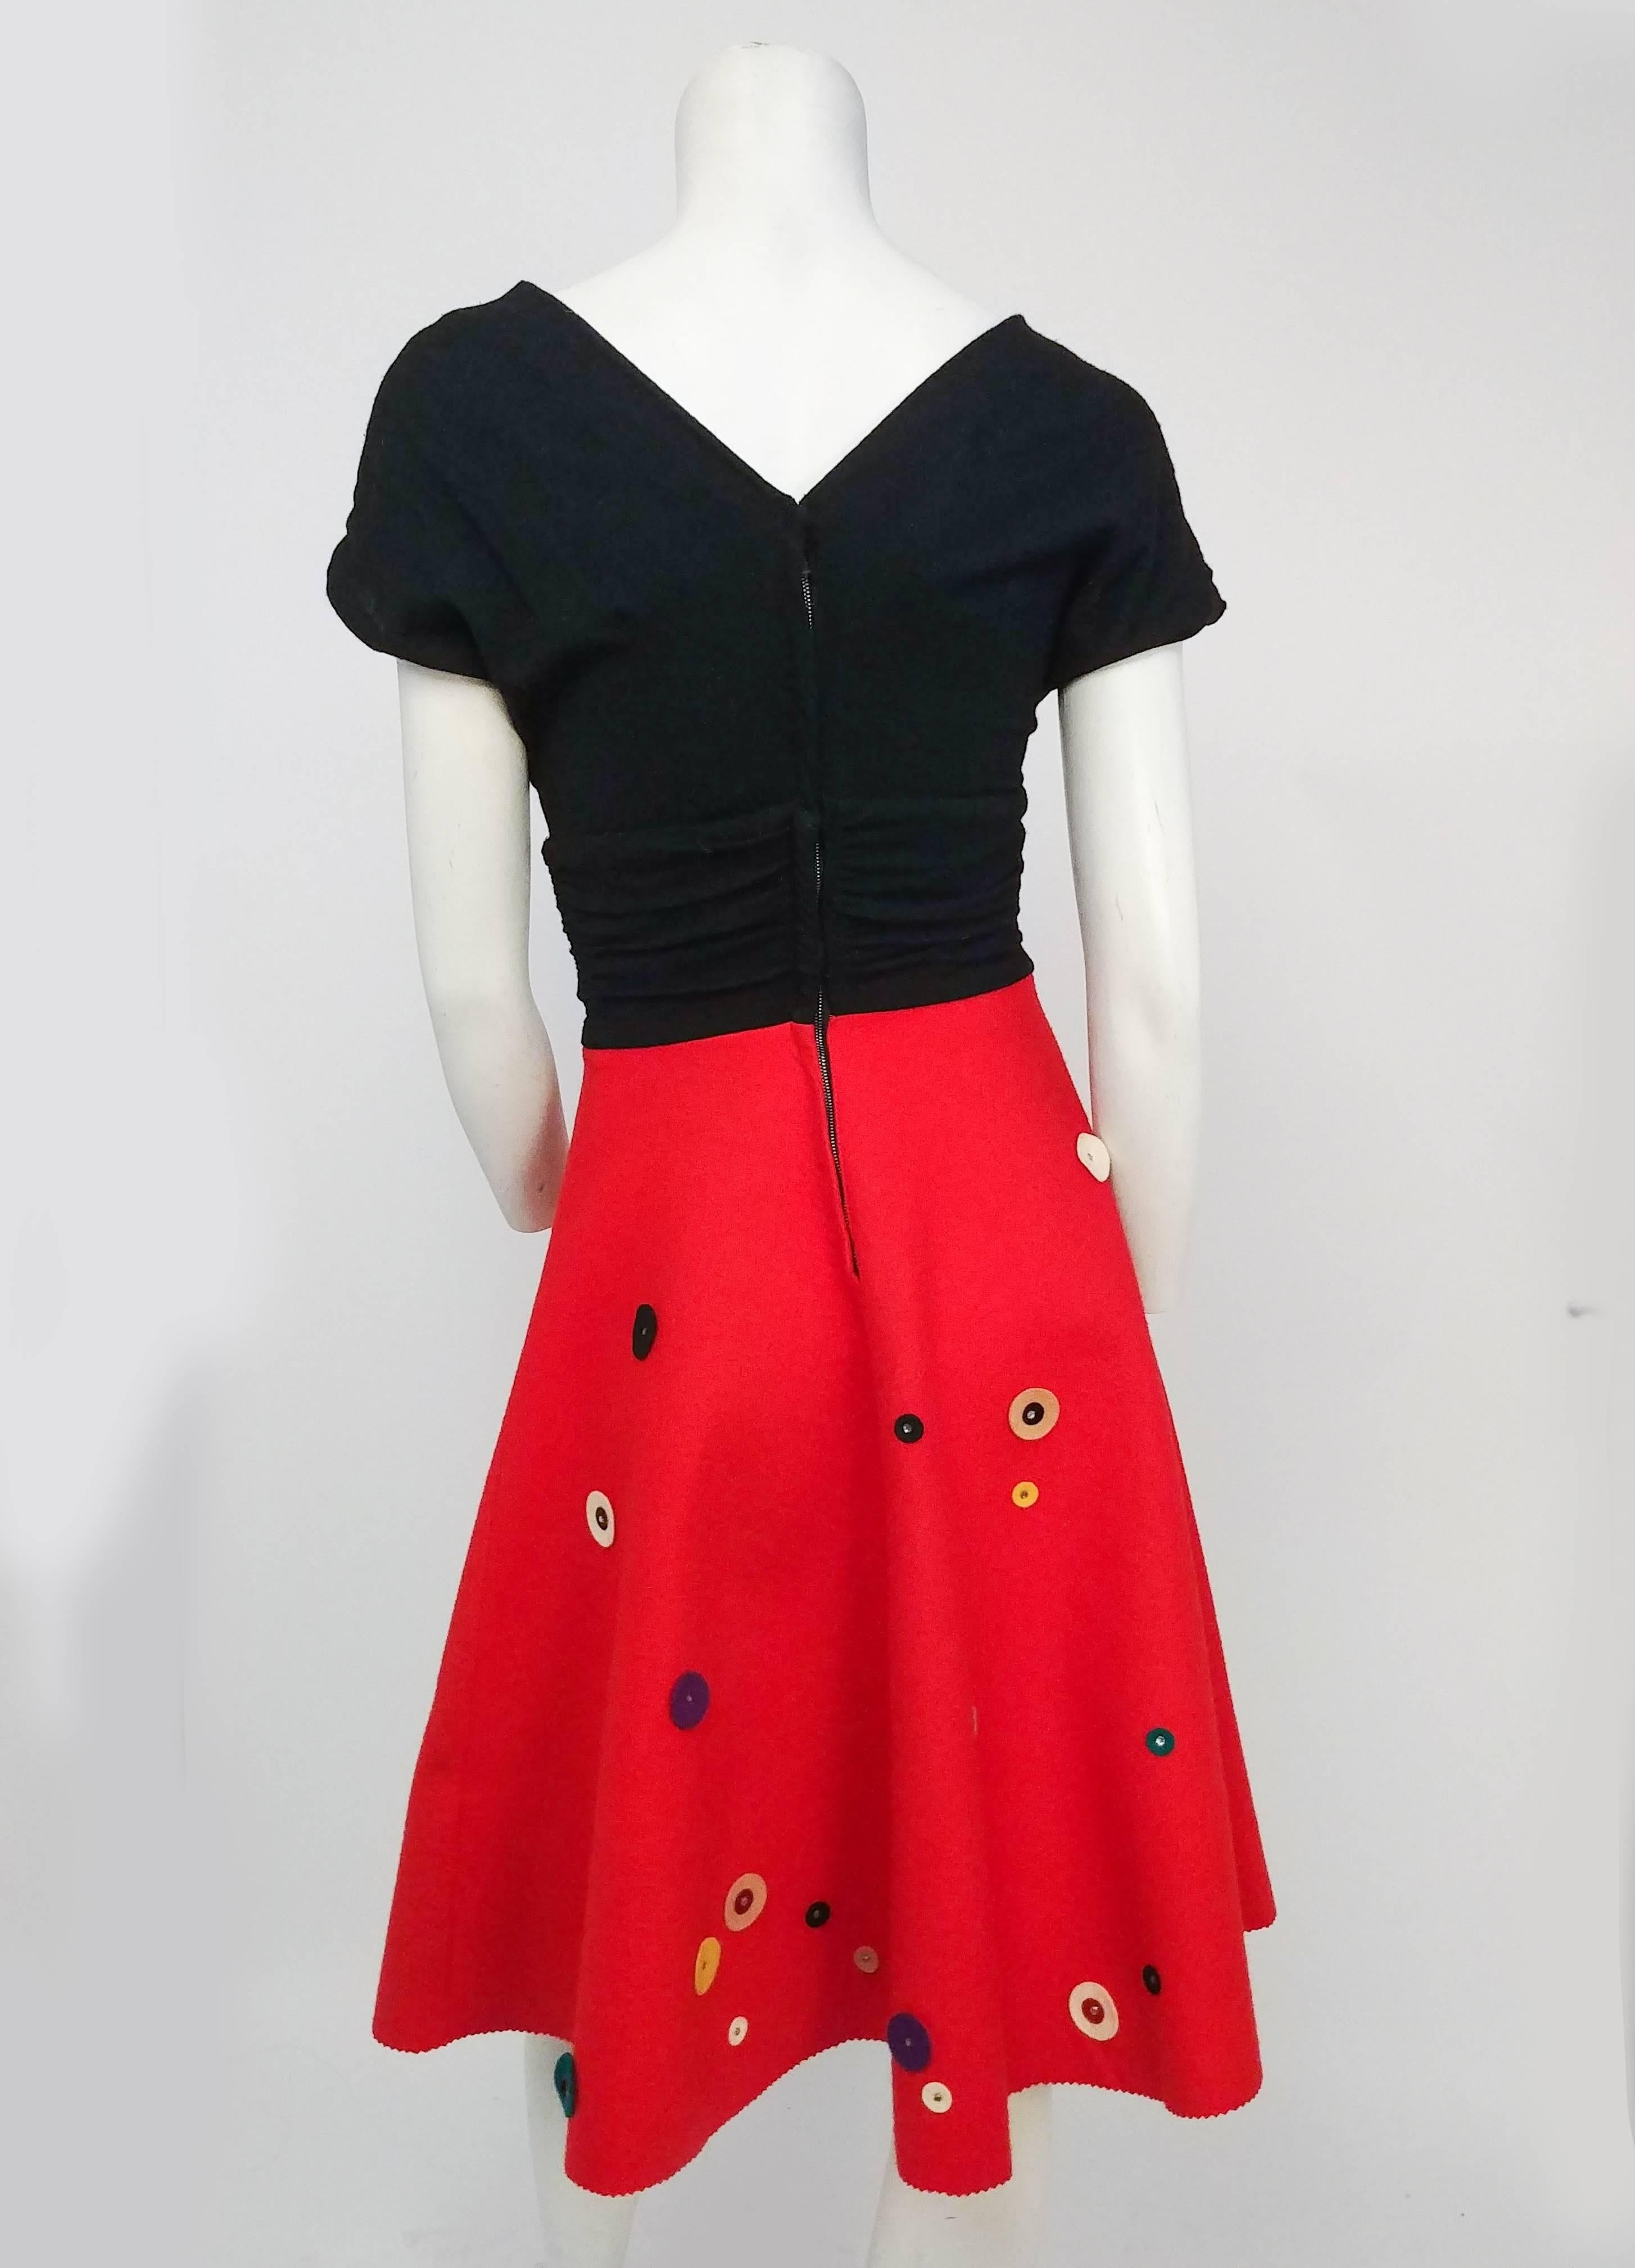 1950s A-Line Red & Black Novelty Dress. Full red felt skirt with adorable felt multicolored circles and rhinestones. Black draped bodice. 